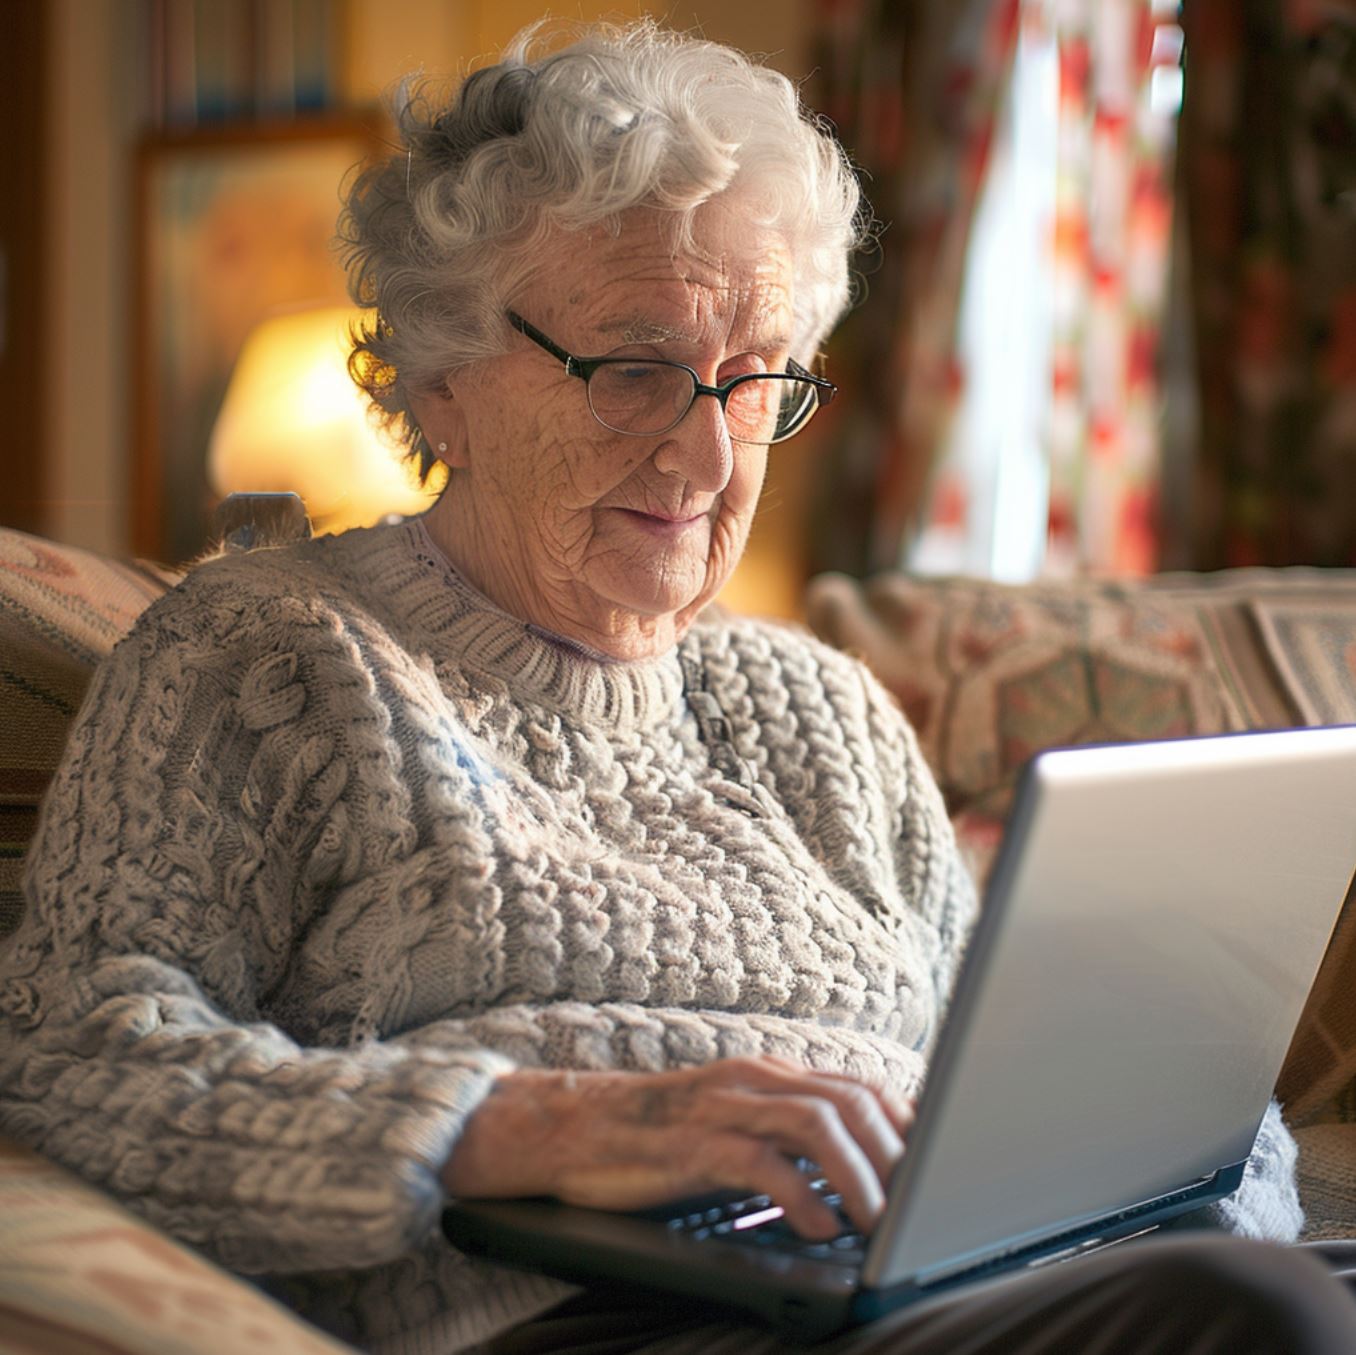 How to Keep Safe Online - A Seniors Guide.